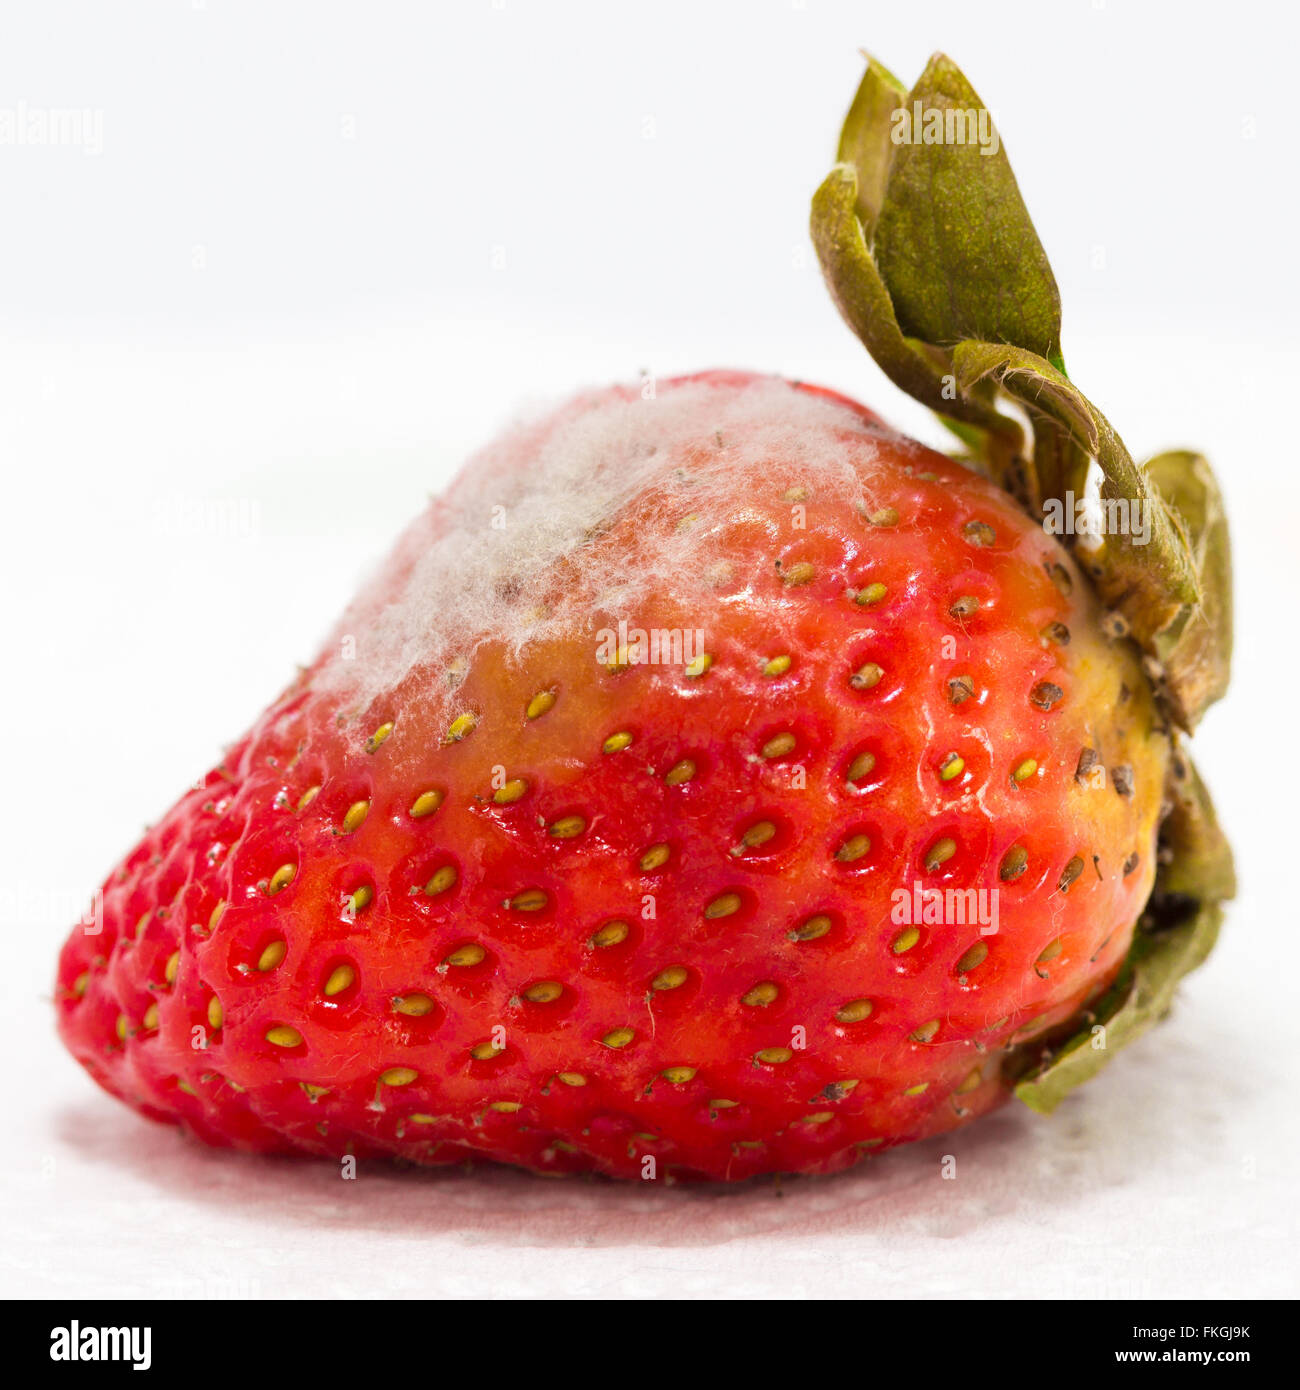 Strawberry with mold fungus, no longer suitable for consumption Stock Photo